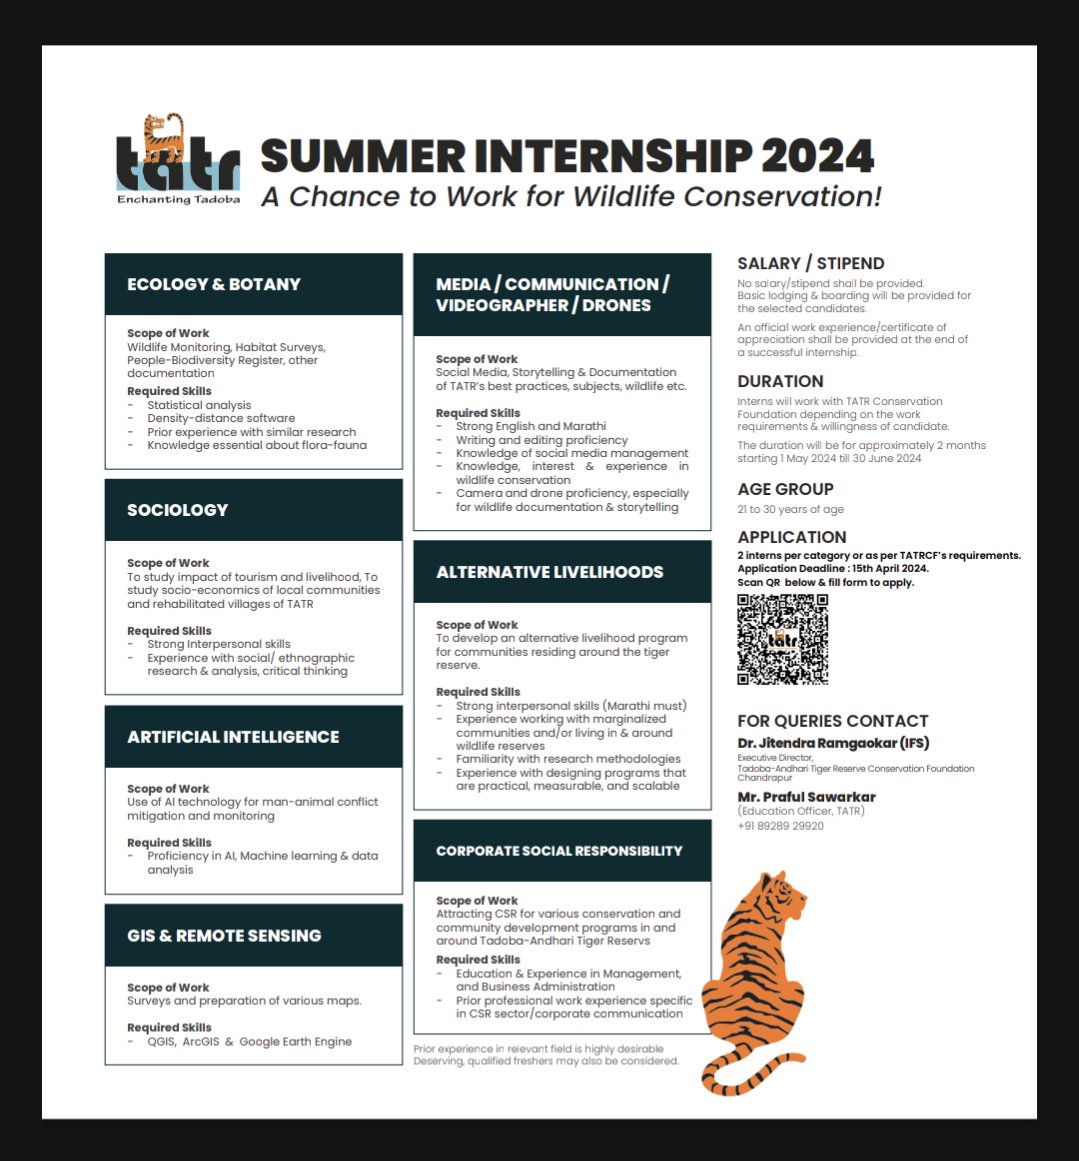 An opportunity to work for wildlife conservation Tadoba-Andhari Tiger Reserve. Summer Internship 2024. #WildlifeConservation #summerinternship #tadobaandharitigerreserve